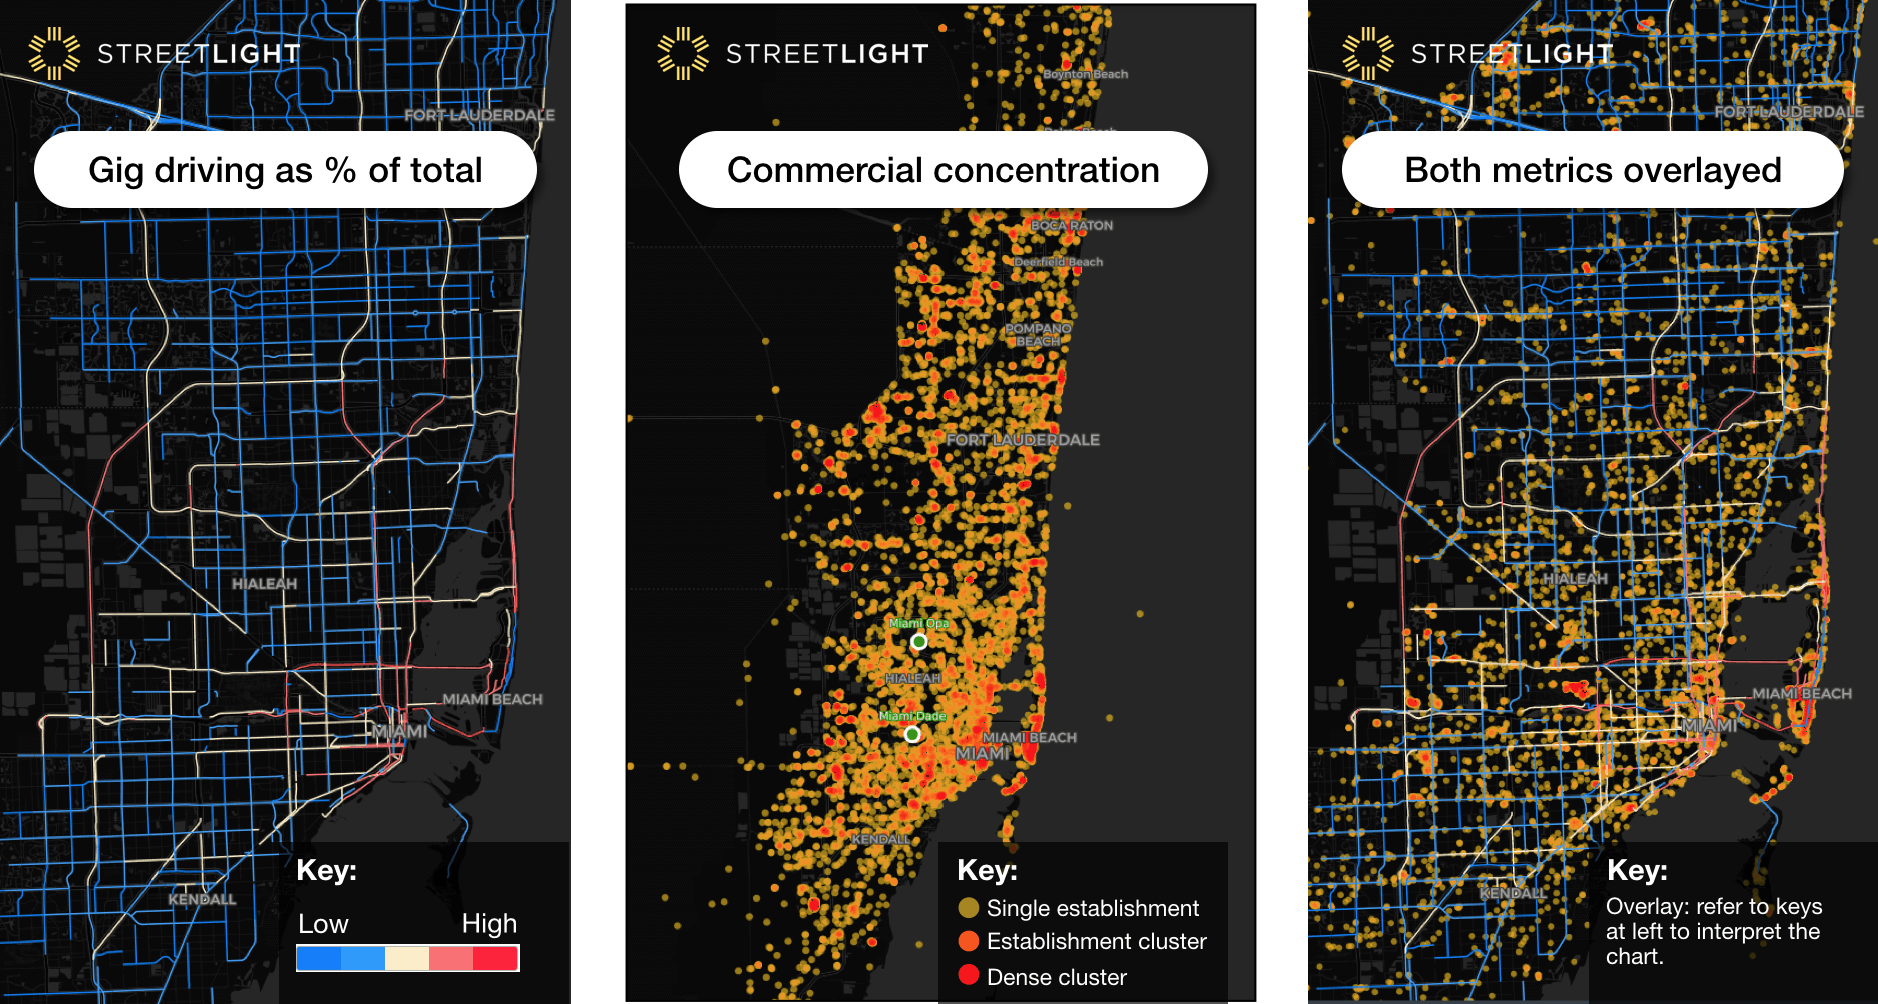 Gig driving as percent of total, location of commercial points of interest (like restaurants, bars, entertainment) and a mashup.